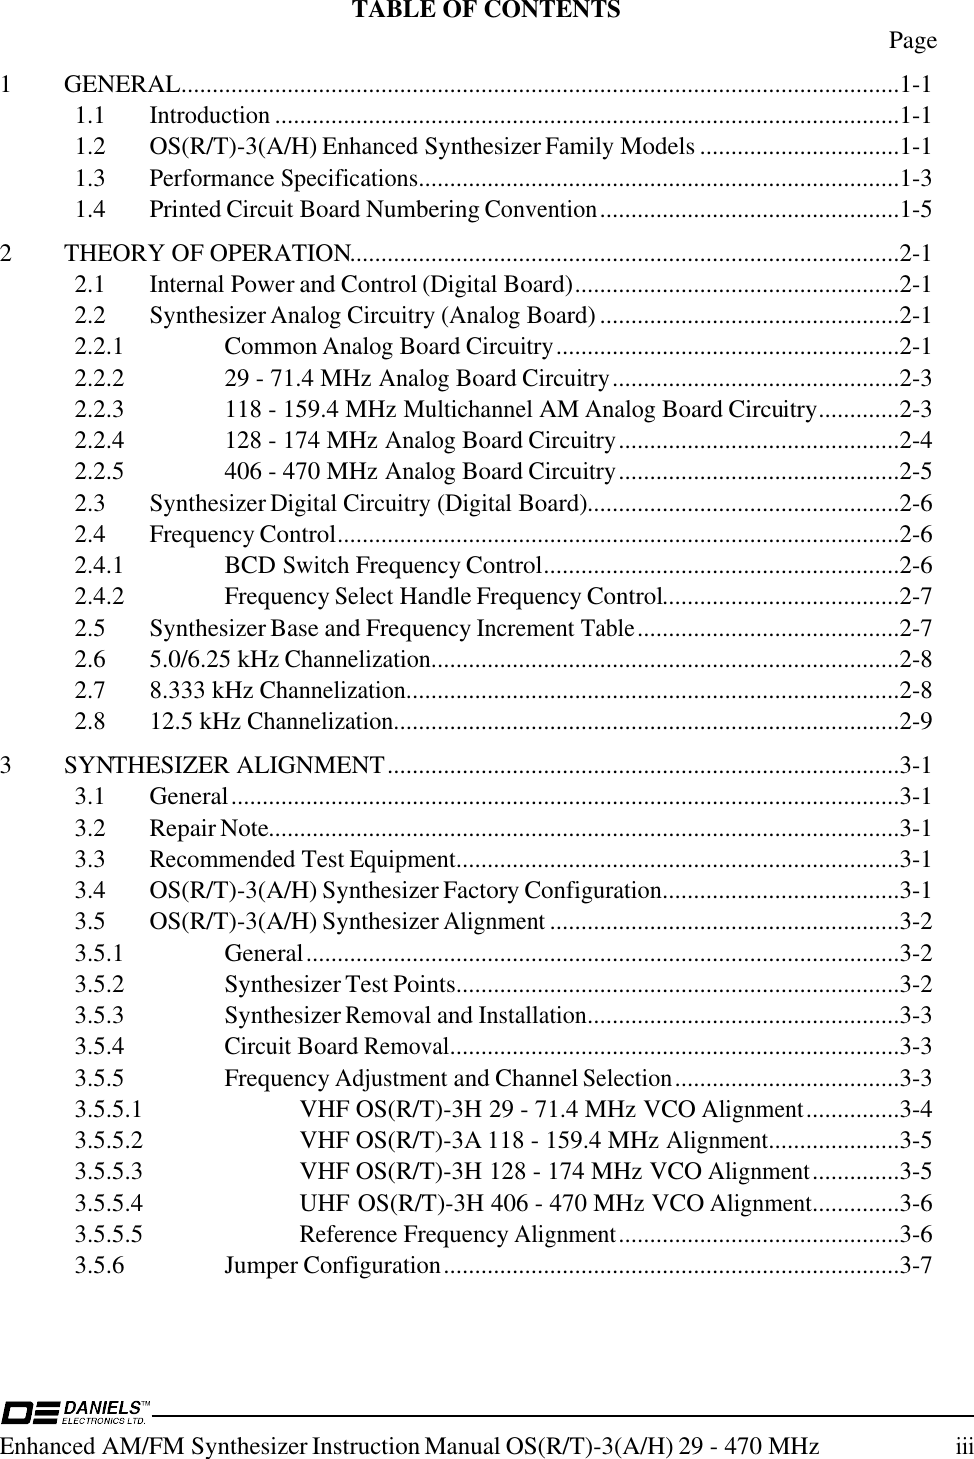 Enhanced AM/FM Synthesizer Instruction Manual OS(R/T)-3(A/H) 29 - 470 MHziiiTABLE OF CONTENTS Page1 GENERAL...................................................................................................................1-11.1Introduction....................................................................................................1-11.2 OS(R/T)-3(A/H) Enhanced Synthesizer Family Models ................................1-11.3Performance Specifications.............................................................................1-31.4 Printed Circuit Board Numbering Convention................................................1-52 THEORY OF OPERATION........................................................................................2-12.1Internal Power and Control (Digital Board)....................................................2-12.2 Synthesizer Analog Circuitry (Analog Board)................................................2-12.2.1 Common Analog Board Circuitry.......................................................2-12.2.2 29 - 71.4 MHz Analog Board Circuitry..............................................2-32.2.3 118 - 159.4 MHz Multichannel AM Analog Board Circuitry.............2-32.2.4 128 - 174 MHz Analog Board Circuitry.............................................2-42.2.5 406 - 470 MHz Analog Board Circuitry.............................................2-52.3 Synthesizer Digital Circuitry (Digital Board)..................................................2-62.4 Frequency Control..........................................................................................2-62.4.1 BCD Switch Frequency Control.........................................................2-62.4.2 Frequency Select Handle Frequency Control......................................2-72.5 Synthesizer Base and Frequency Increment Table..........................................2-72.6 5.0/6.25 kHz Channelization...........................................................................2-82.7 8.333 kHz Channelization...............................................................................2-82.8 12.5 kHz Channelization.................................................................................2-93 SYNTHESIZER ALIGNMENT..................................................................................3-13.1 General...........................................................................................................3-13.2 Repair Note.....................................................................................................3-13.3Recommended Test Equipment.......................................................................3-13.4 OS(R/T)-3(A/H) Synthesizer Factory Configuration......................................3-13.5 OS(R/T)-3(A/H) Synthesizer Alignment........................................................3-23.5.1 General...............................................................................................3-23.5.2 Synthesizer Test Points.......................................................................3-23.5.3 Synthesizer Removal and Installation..................................................3-33.5.4Circuit Board Removal........................................................................3-33.5.5 Frequency Adjustment and Channel Selection....................................3-33.5.5.1 VHF OS(R/T)-3H 29 - 71.4 MHz VCO Alignment...............3-43.5.5.2 VHF OS(R/T)-3A 118 - 159.4 MHz Alignment.....................3-53.5.5.3 VHF OS(R/T)-3H 128 - 174 MHz VCO Alignment..............3-53.5.5.4 UHF OS(R/T)-3H 406 - 470 MHz VCO Alignment..............3-63.5.5.5Reference Frequency Alignment.............................................3-63.5.6 Jumper Configuration.........................................................................3-7